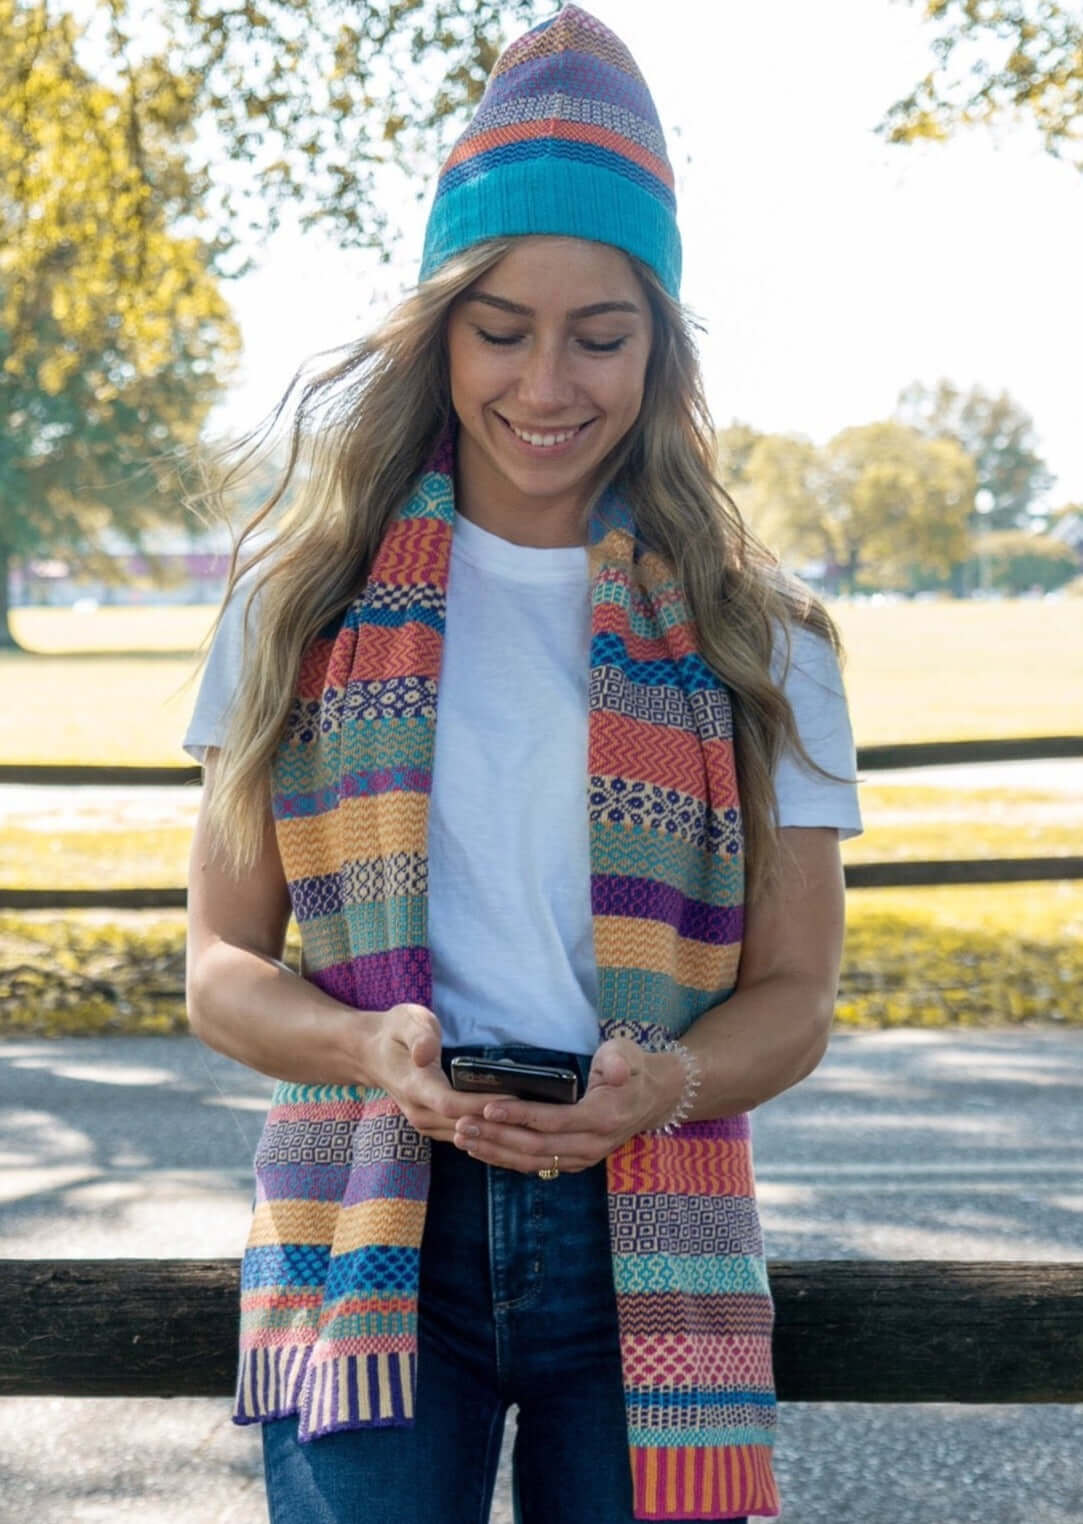 Solmate SUNNY Knitted Scarf with Colors in this Scarf Turquoise, Orange, Yellow, Purple and Blue | Made in USA | Classy Cozy Cool Women's Made in America Clothing Boutique